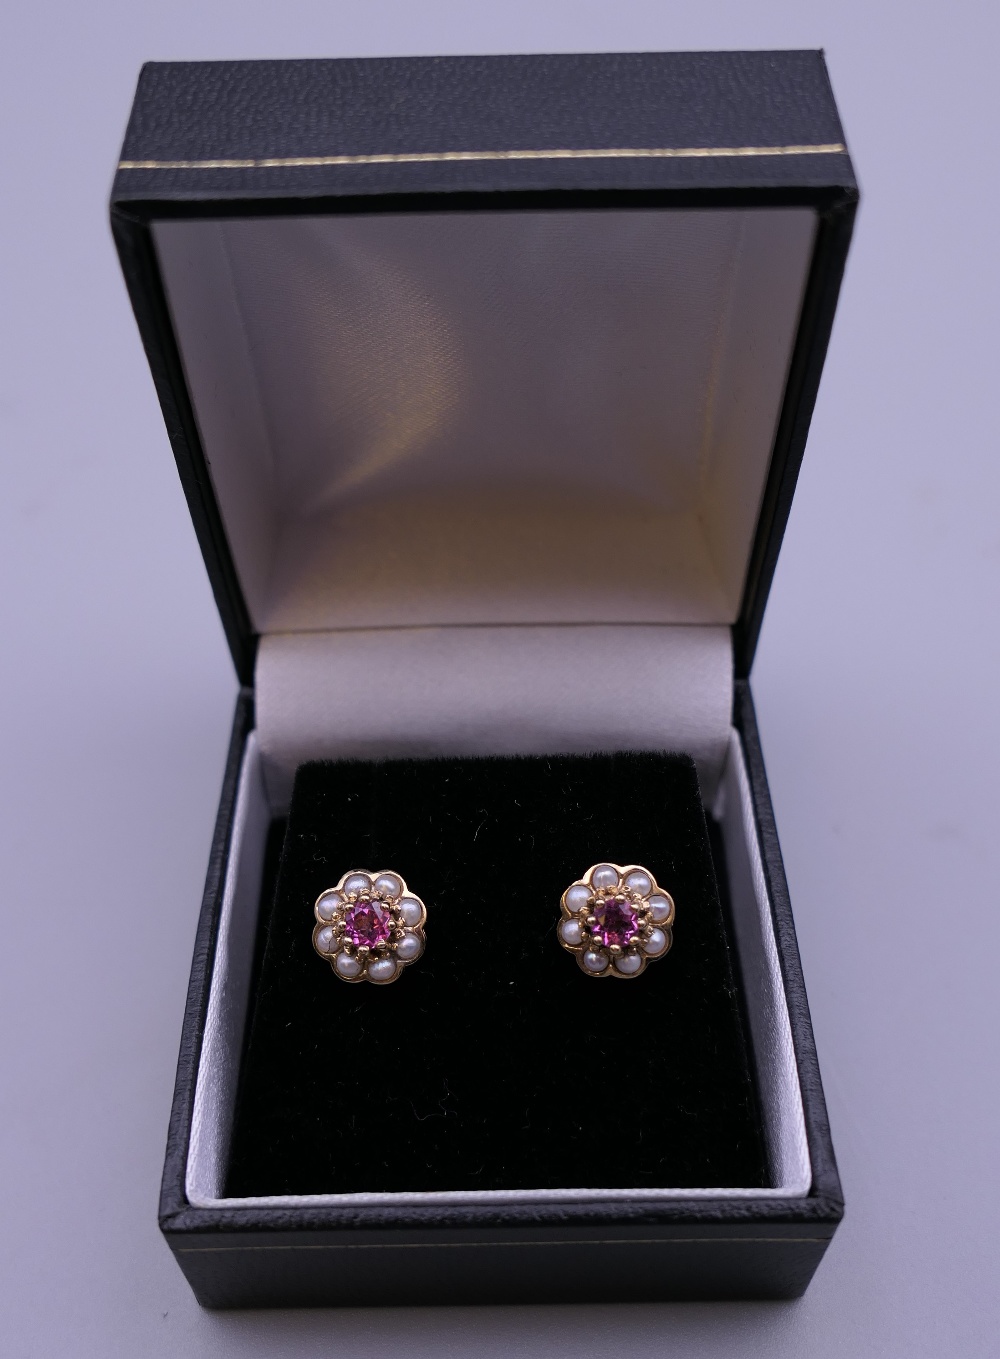 A pair of 9 ct gold pink tourmaline and pearl earrings. 8 mm high.